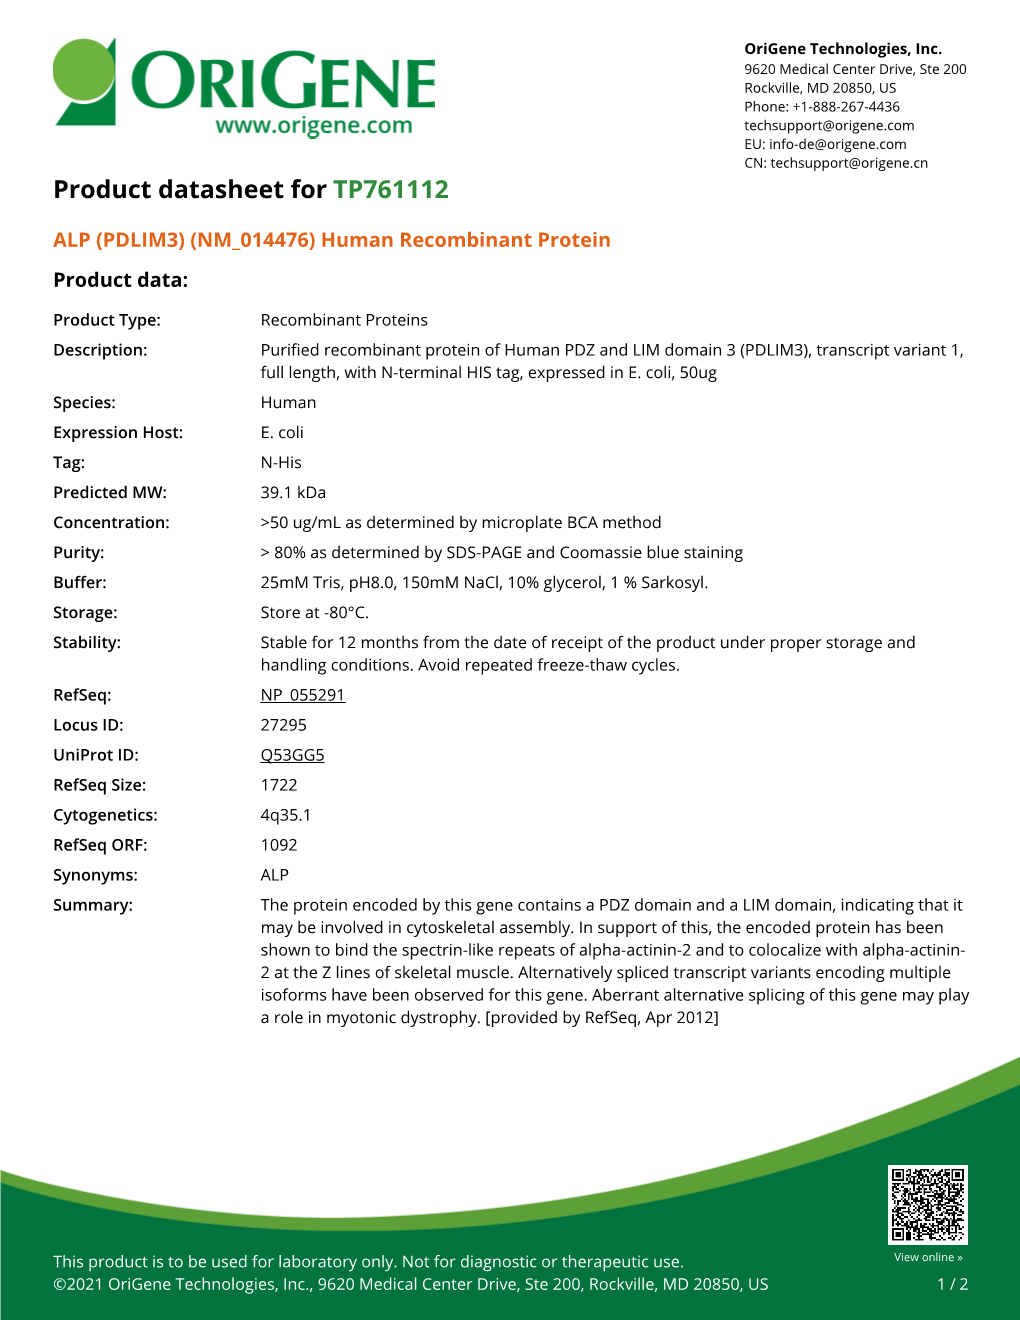 ALP (PDLIM3) (NM 014476) Human Recombinant Protein Product Data